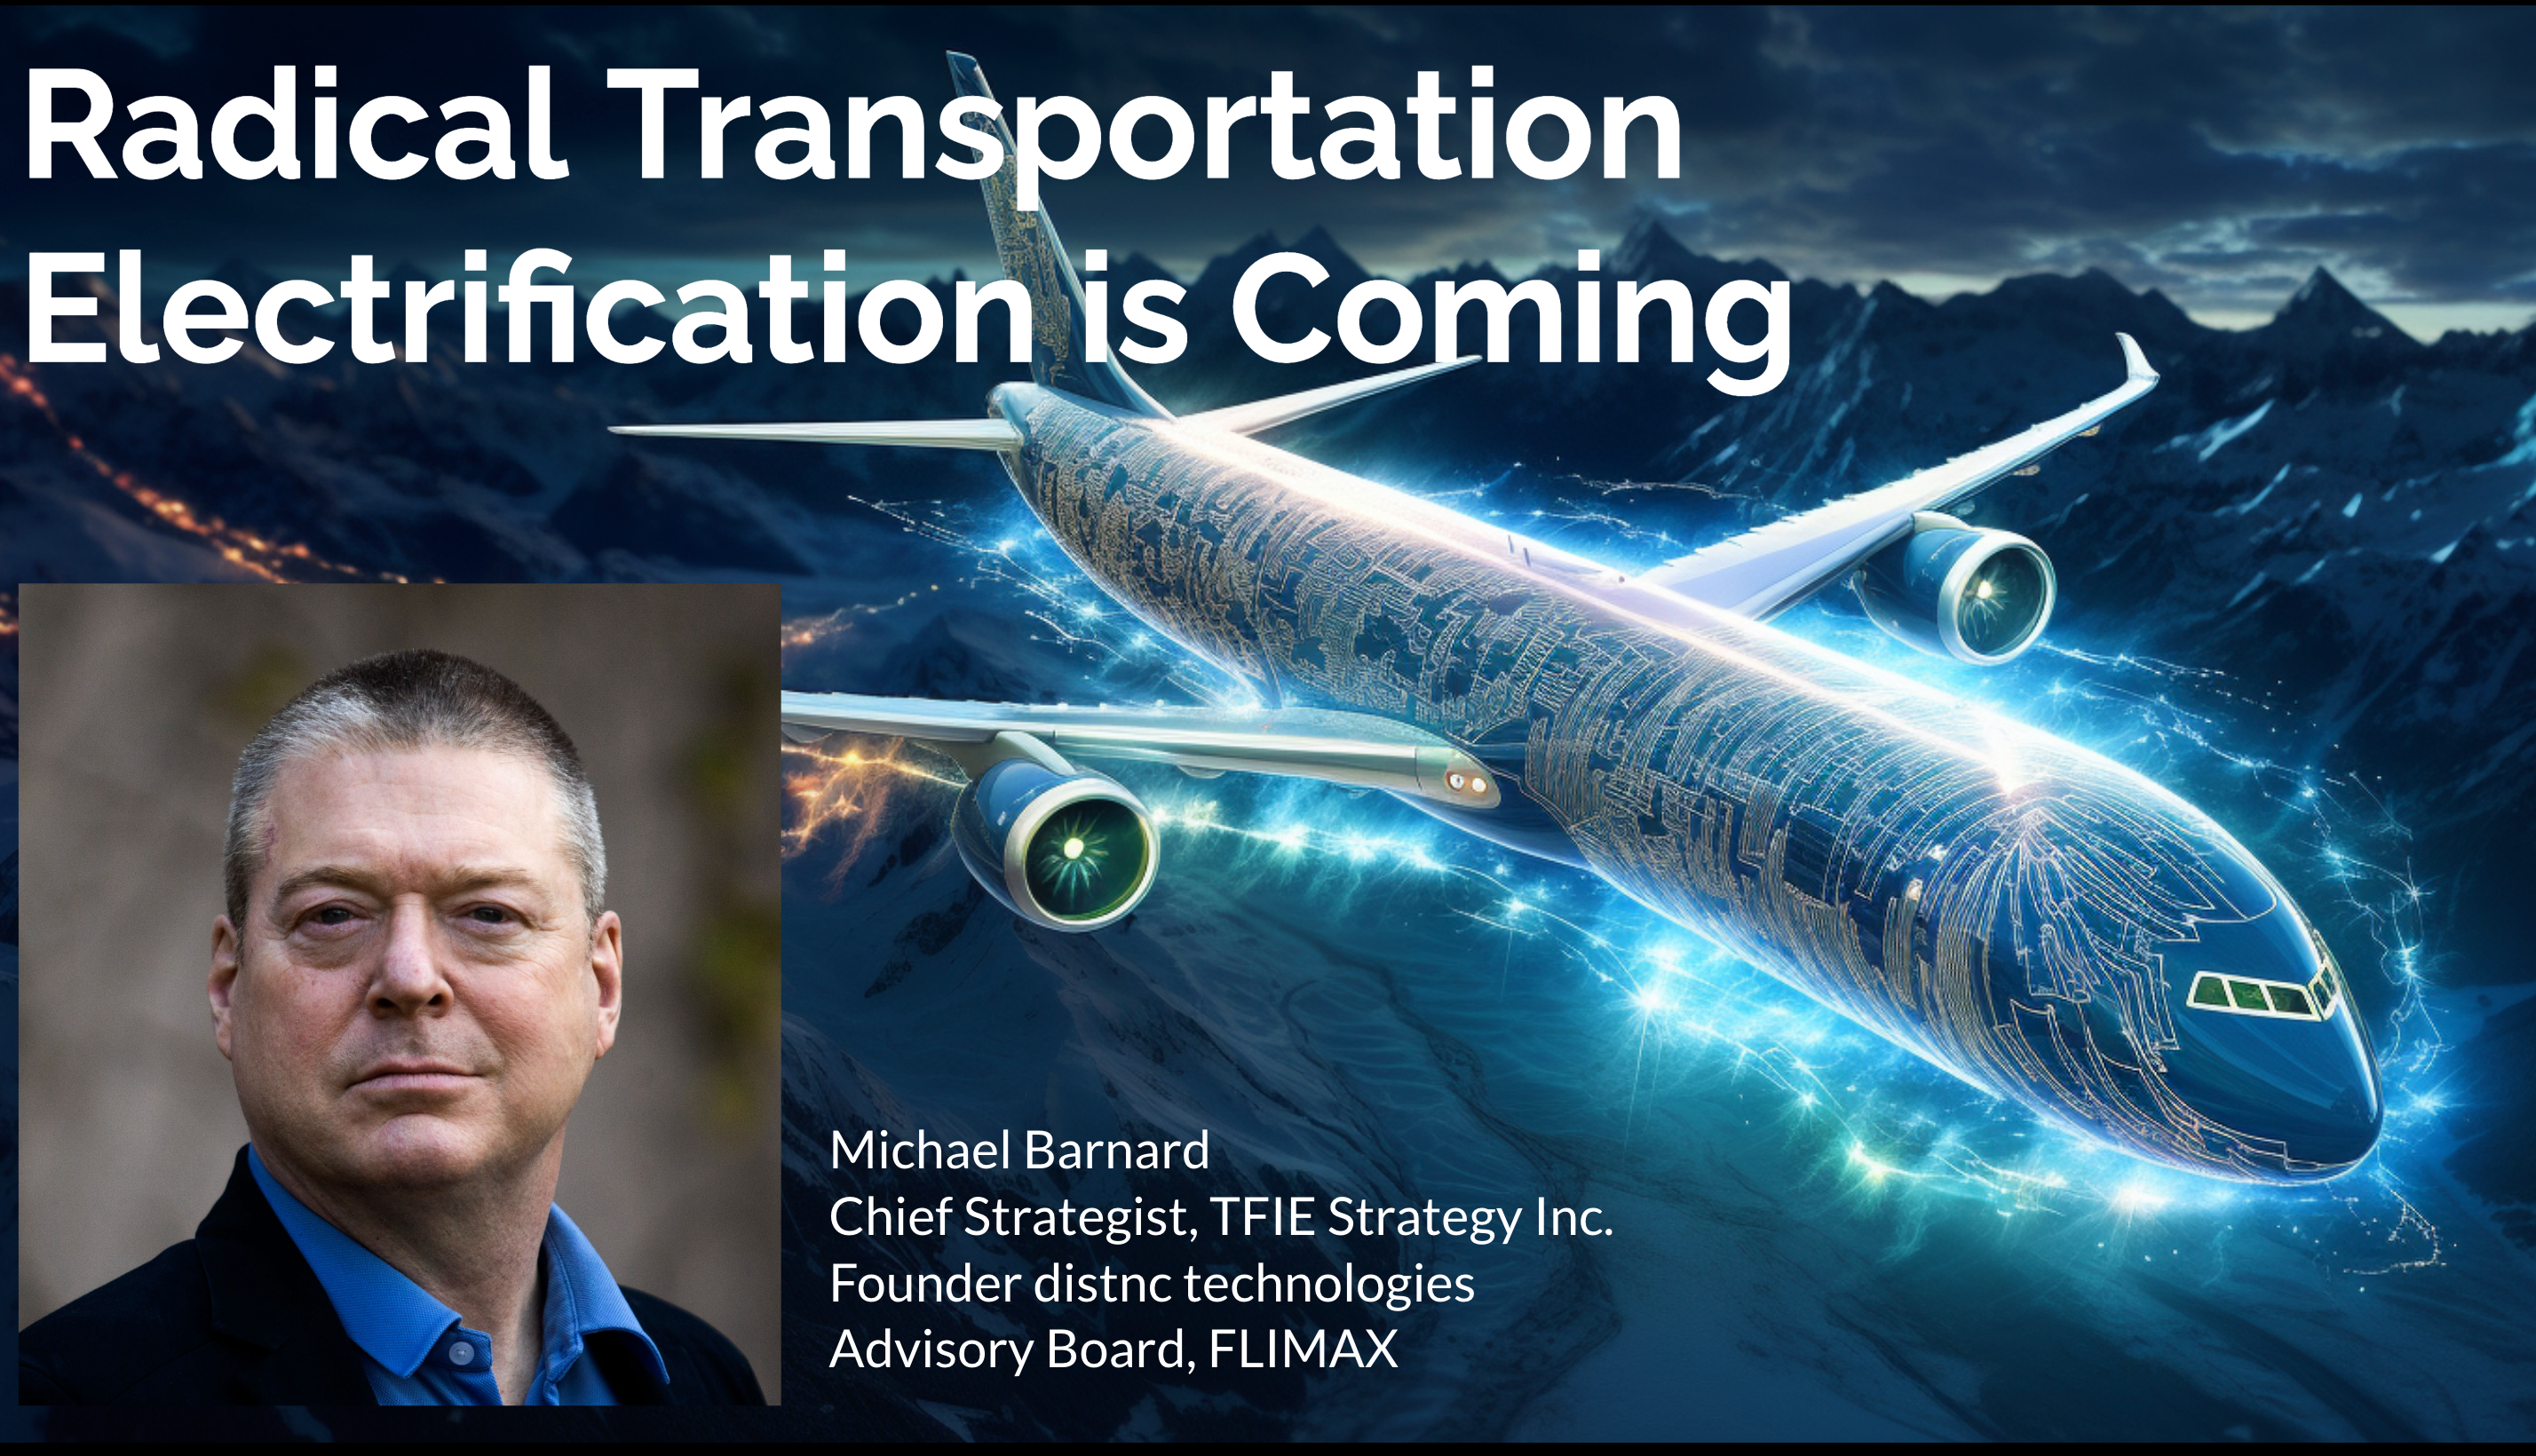 Cover slide of presentation to AUSIMM on radical electrification of transportation by Michael Barnard, Chief Strategist, TFIE Strategy Inc.